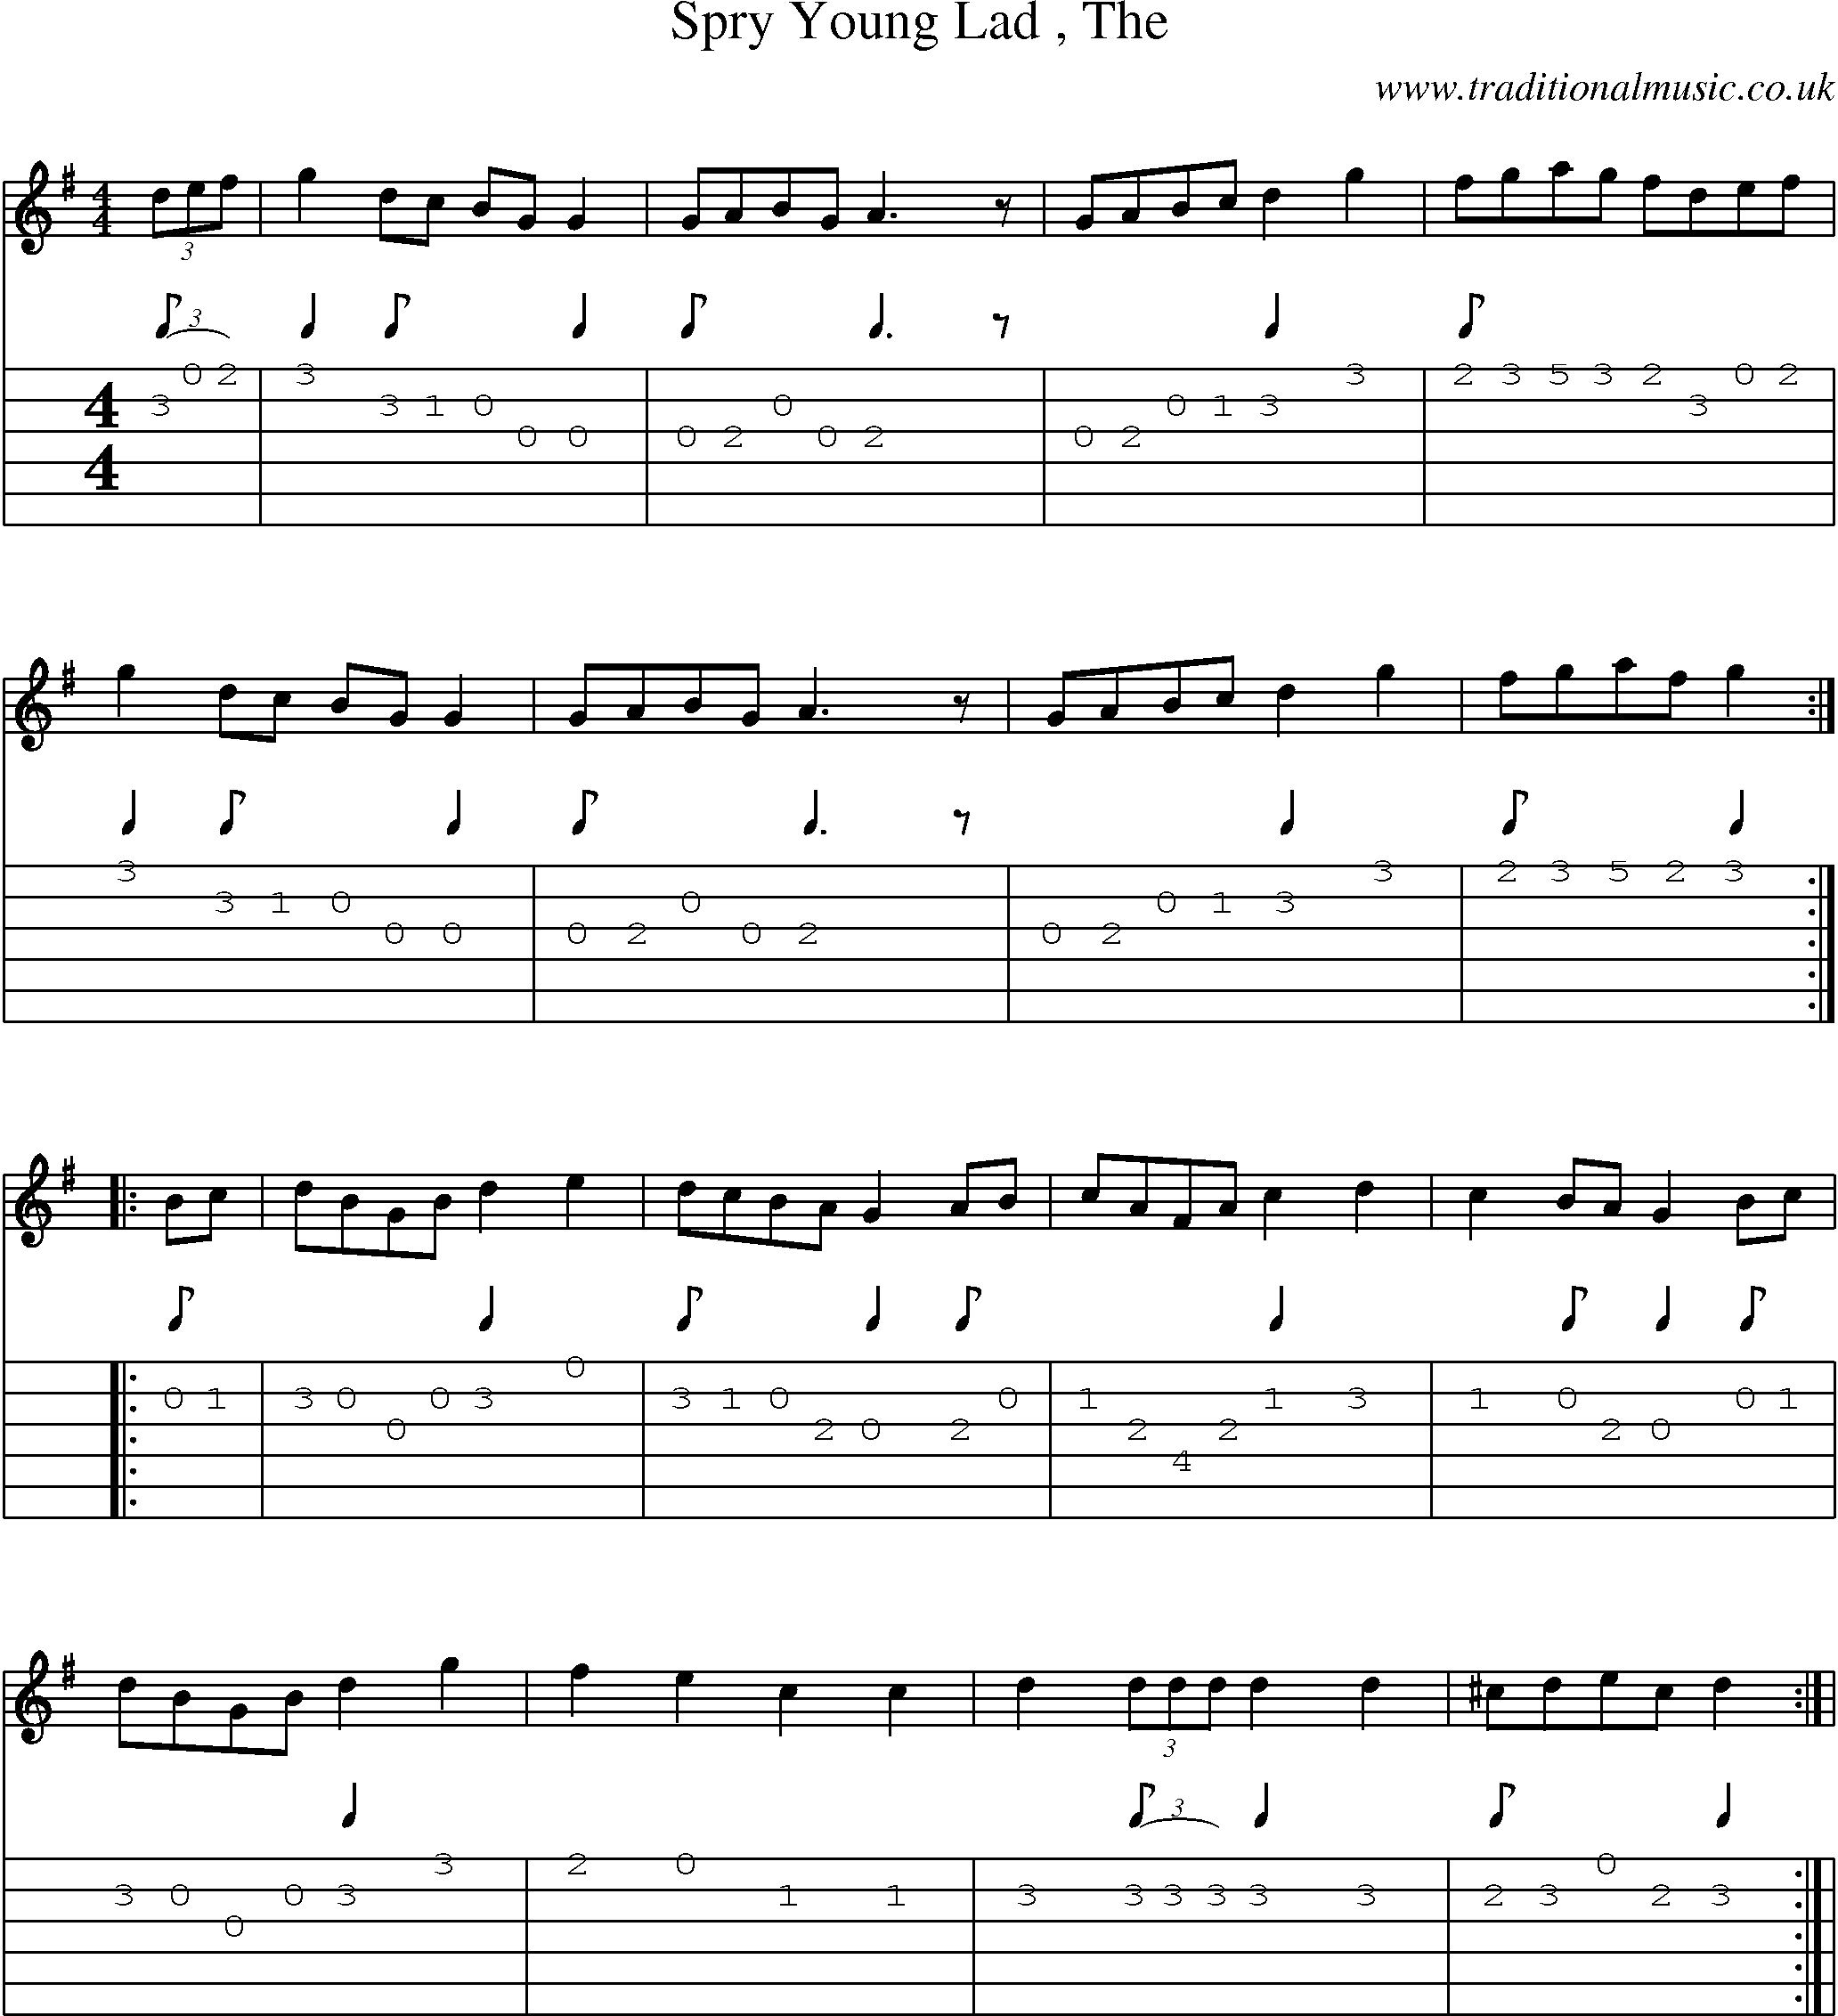 Music Score and Guitar Tabs for Spry Young Lad